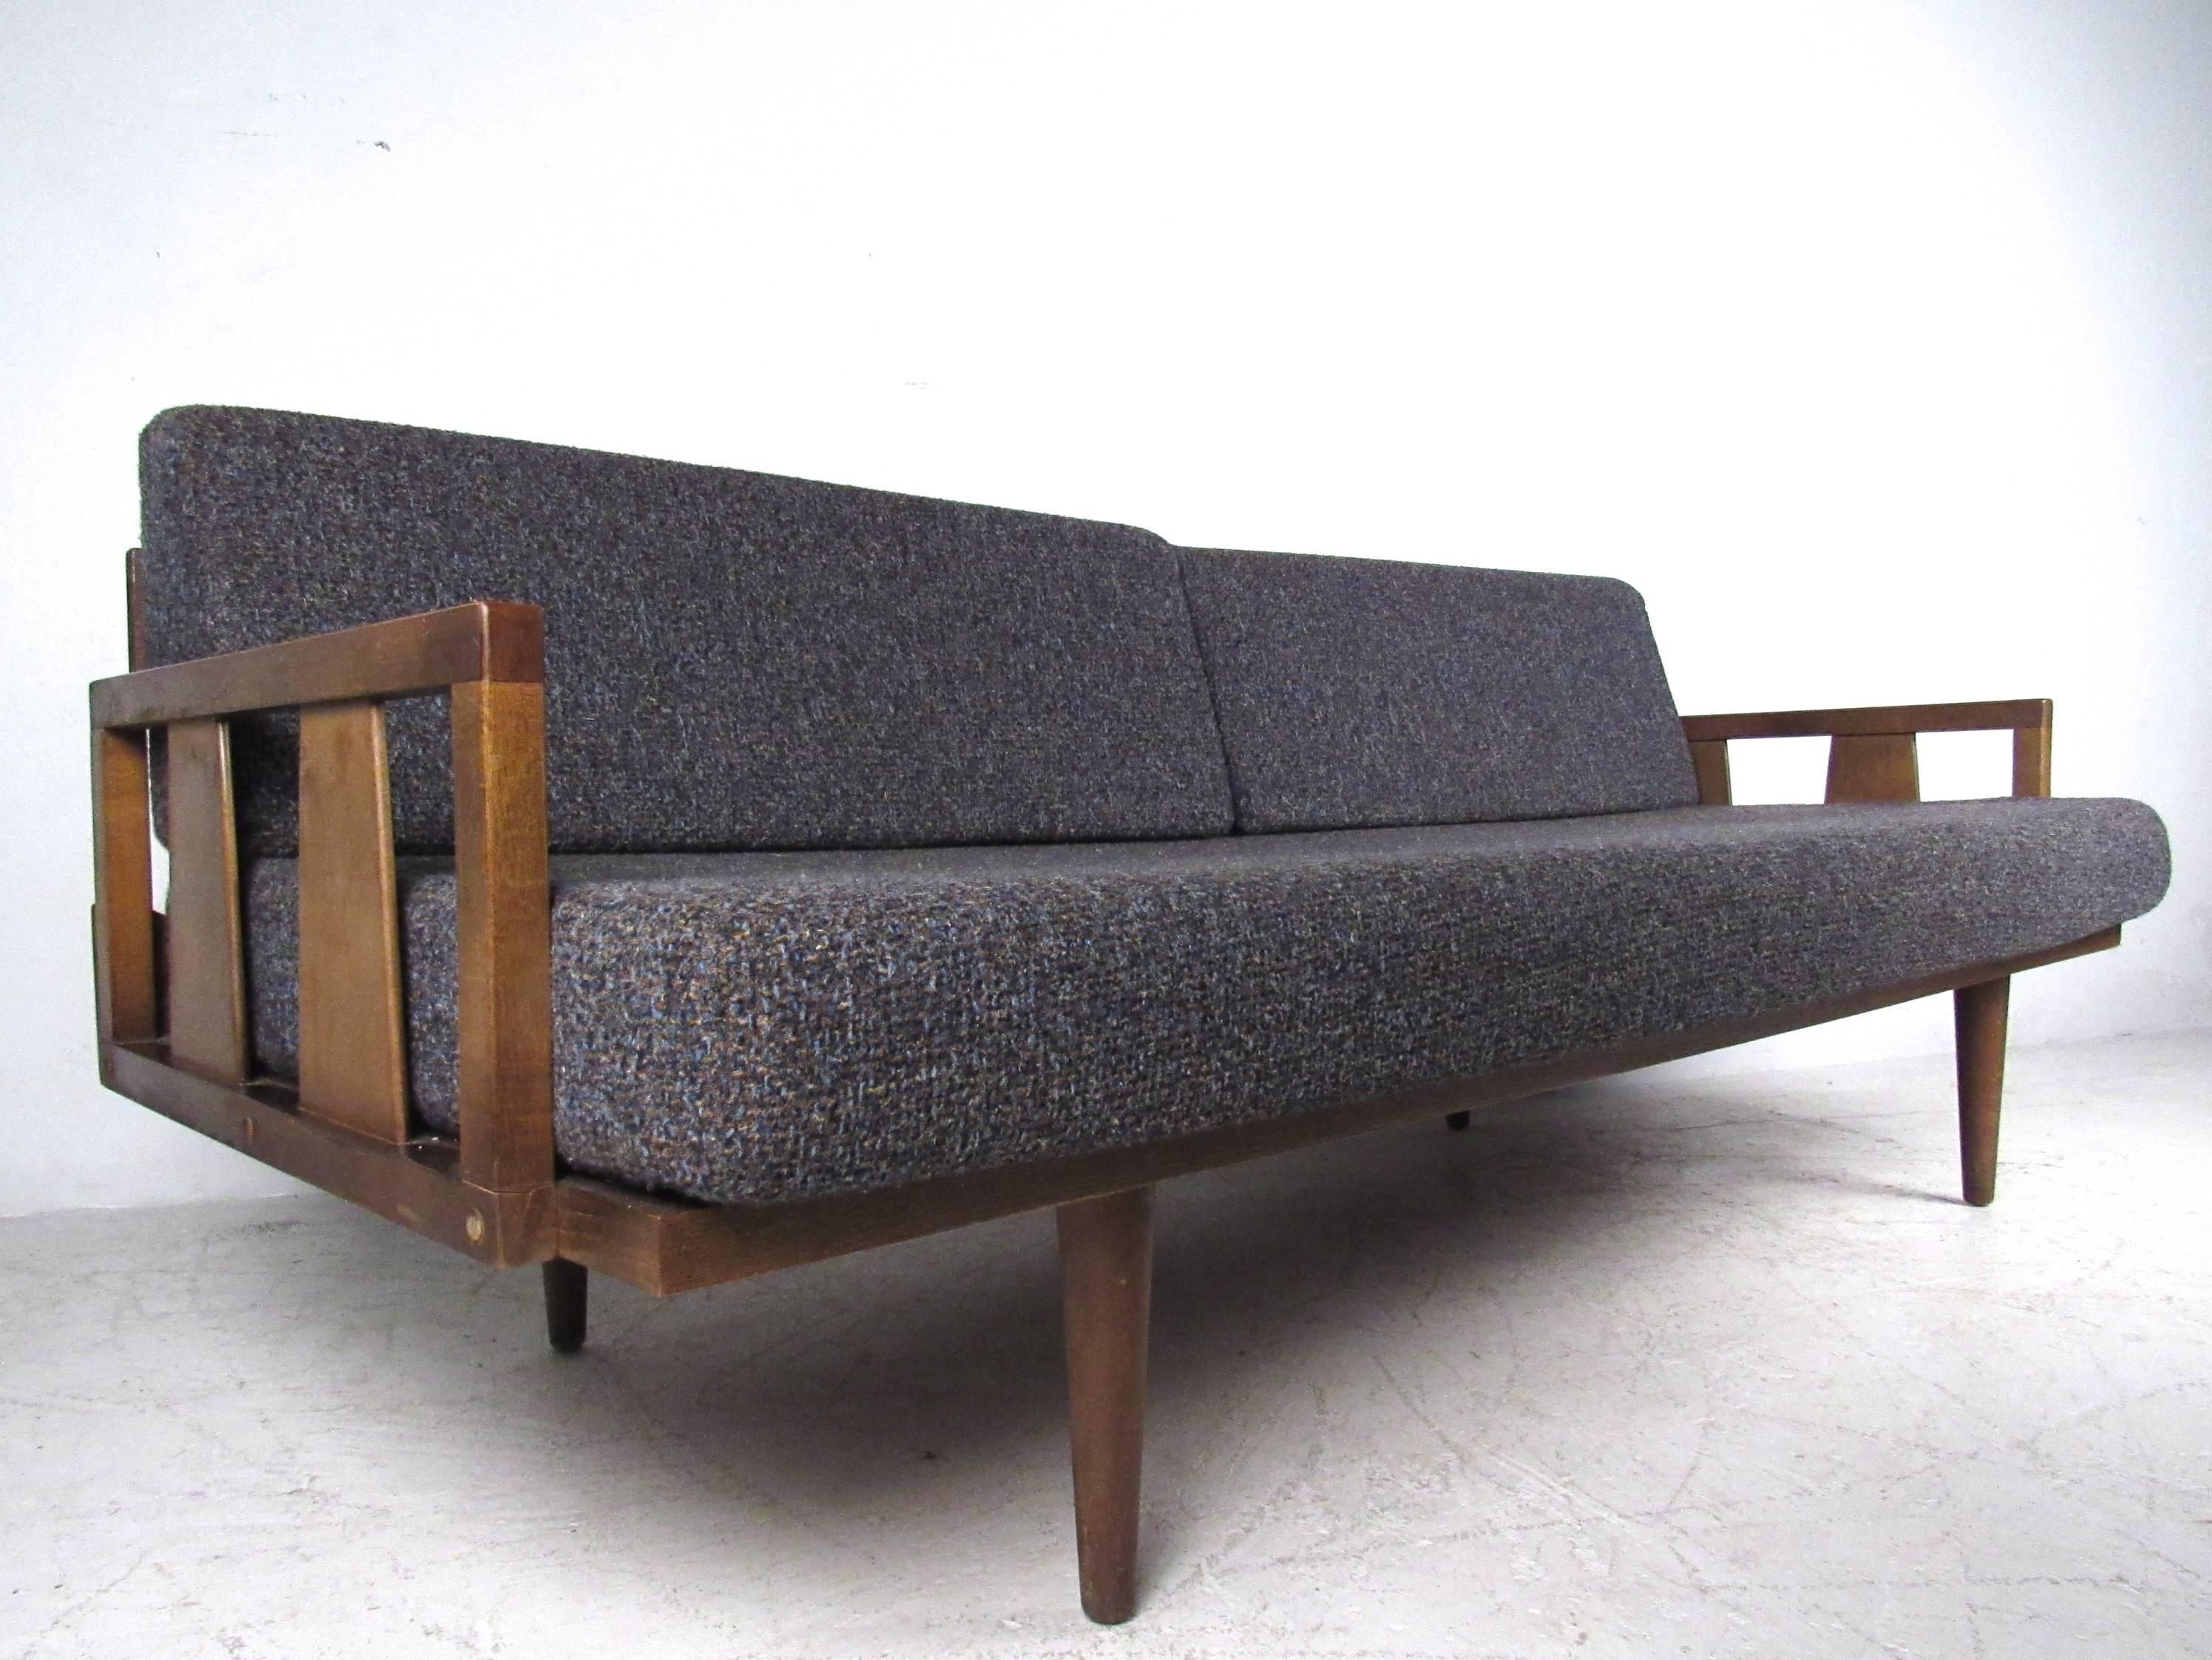 This vintage upholstered sofa offers a wide seating area and easily converts to a daybed by removing the seat back cushions. Tapered legs, cutaway arm rests, and comfortable versatility make this a unique addition a variety of seating arrangements.